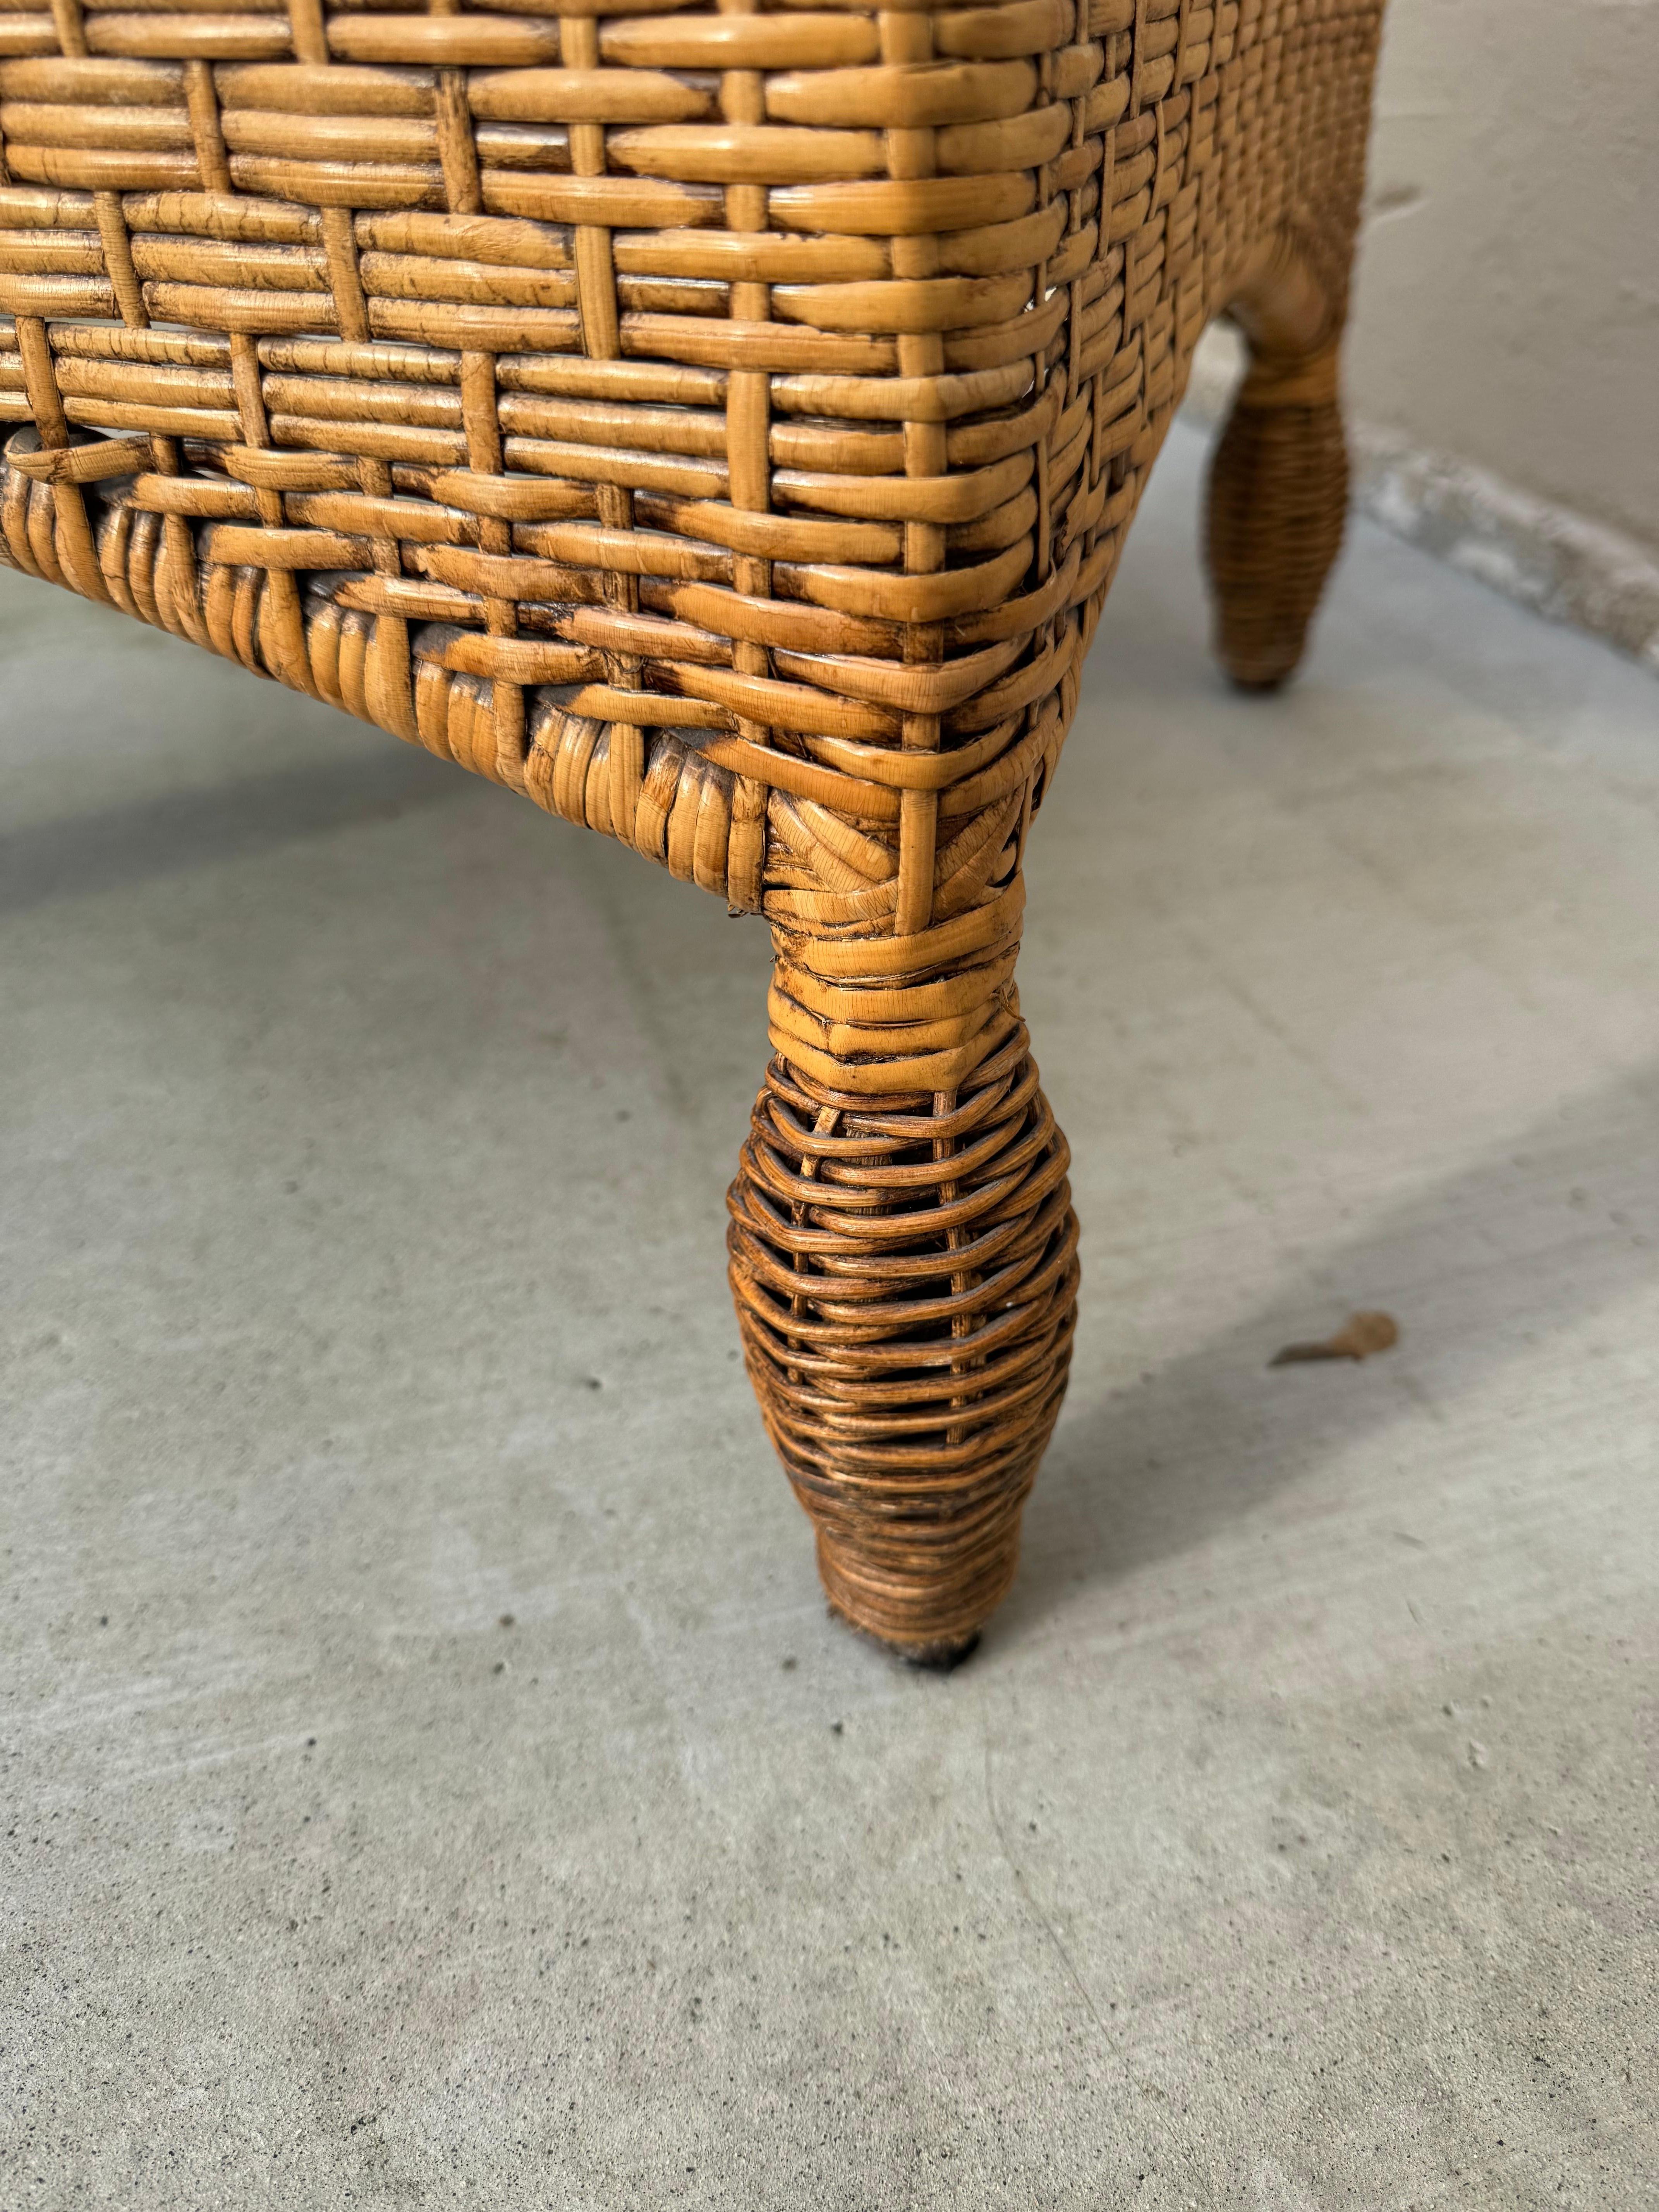 1970's Boho Chic Wicker or Rattan Table In Good Condition For Sale In San Carlos, CA